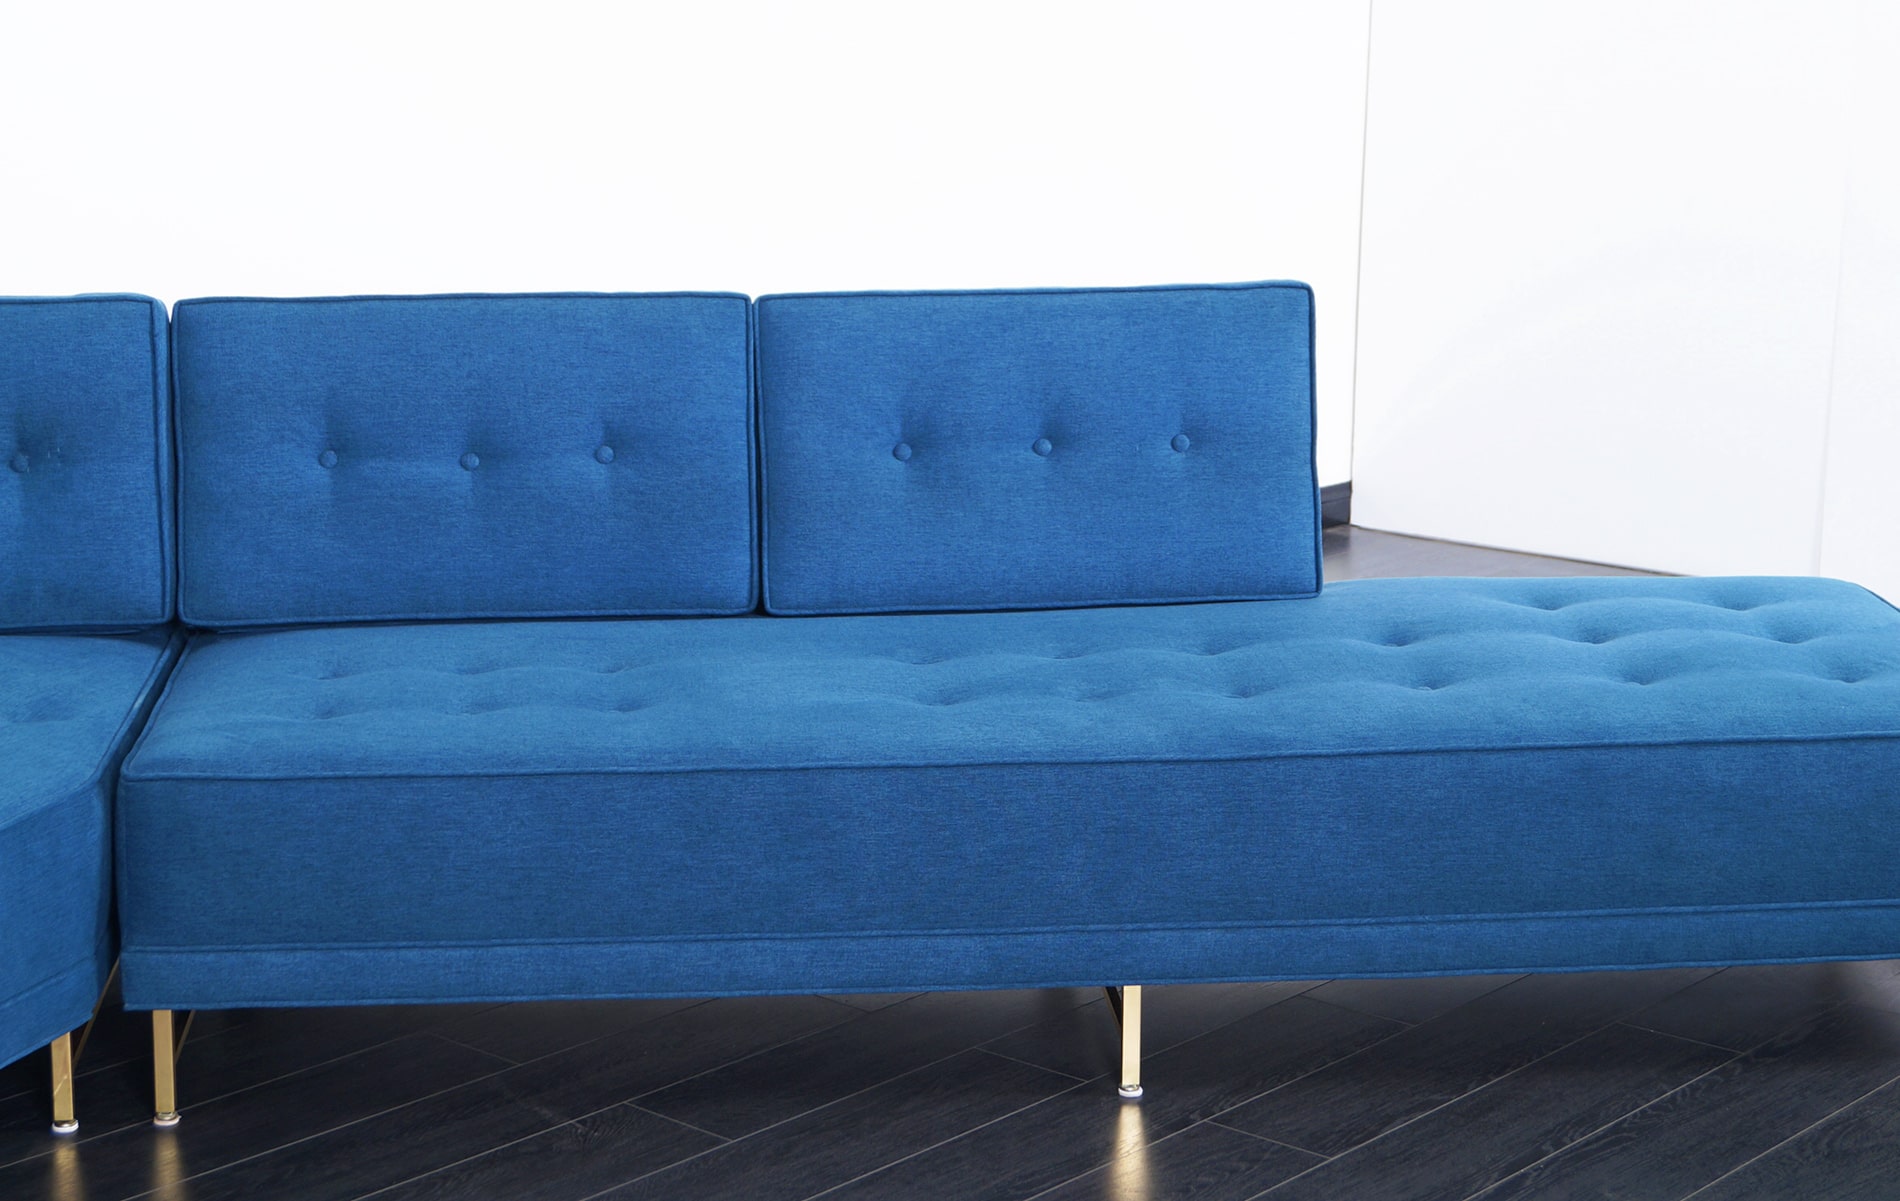 Vintage Sectional Sofa by Paul McCobb for Directional